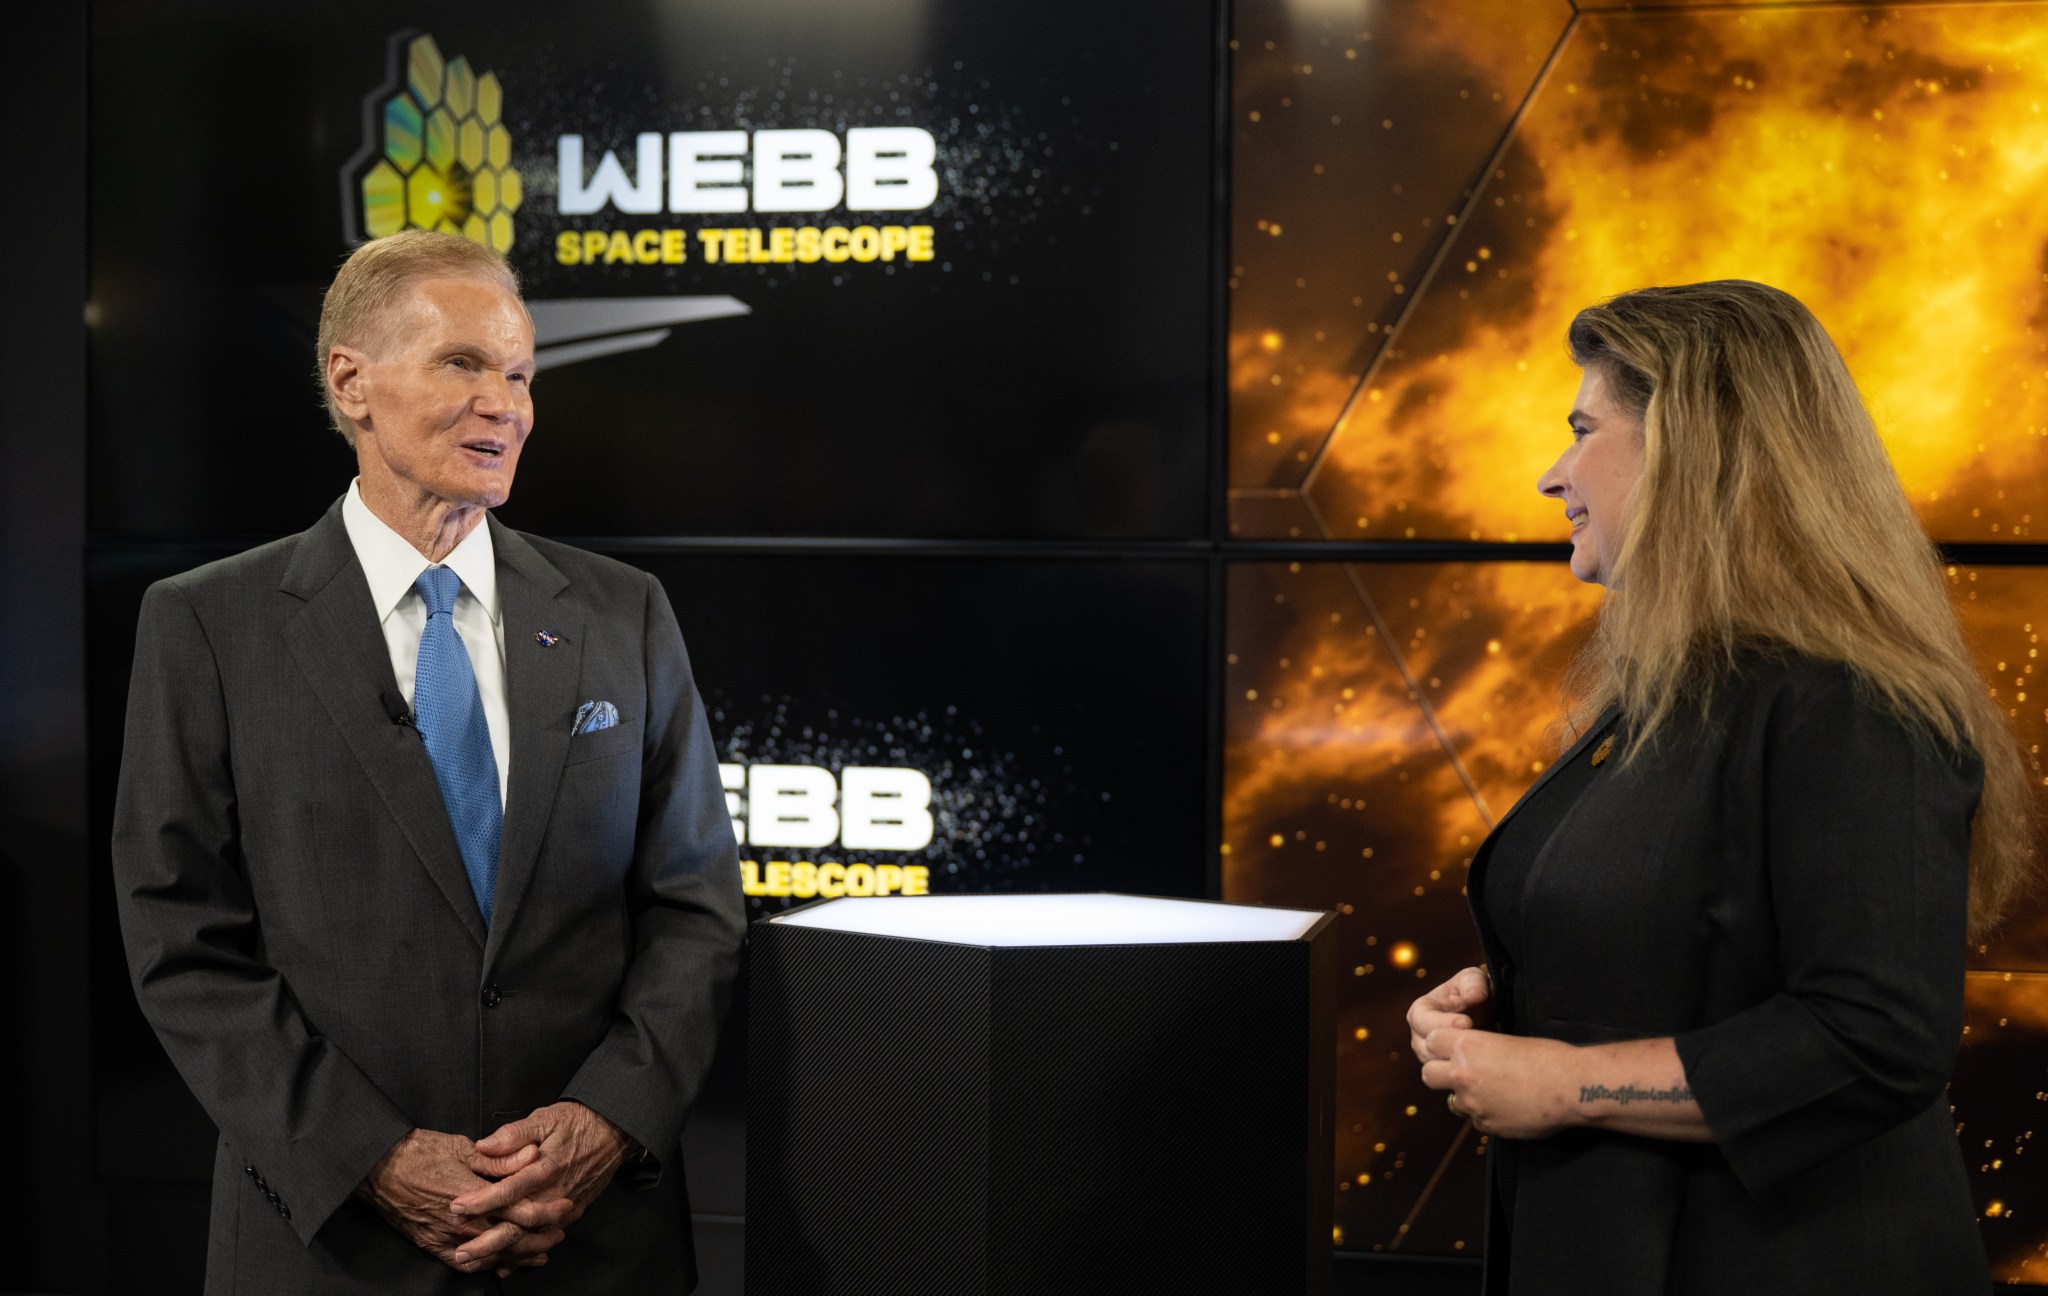 NASA Administrator Bill Nelson, left, speaks with Assistant Director of Science at NASA's Goddard Space Flight Center Michelle Thaller, right, during a broadcast releasing the first full-color images from NASA's James Webb Space Telescope.